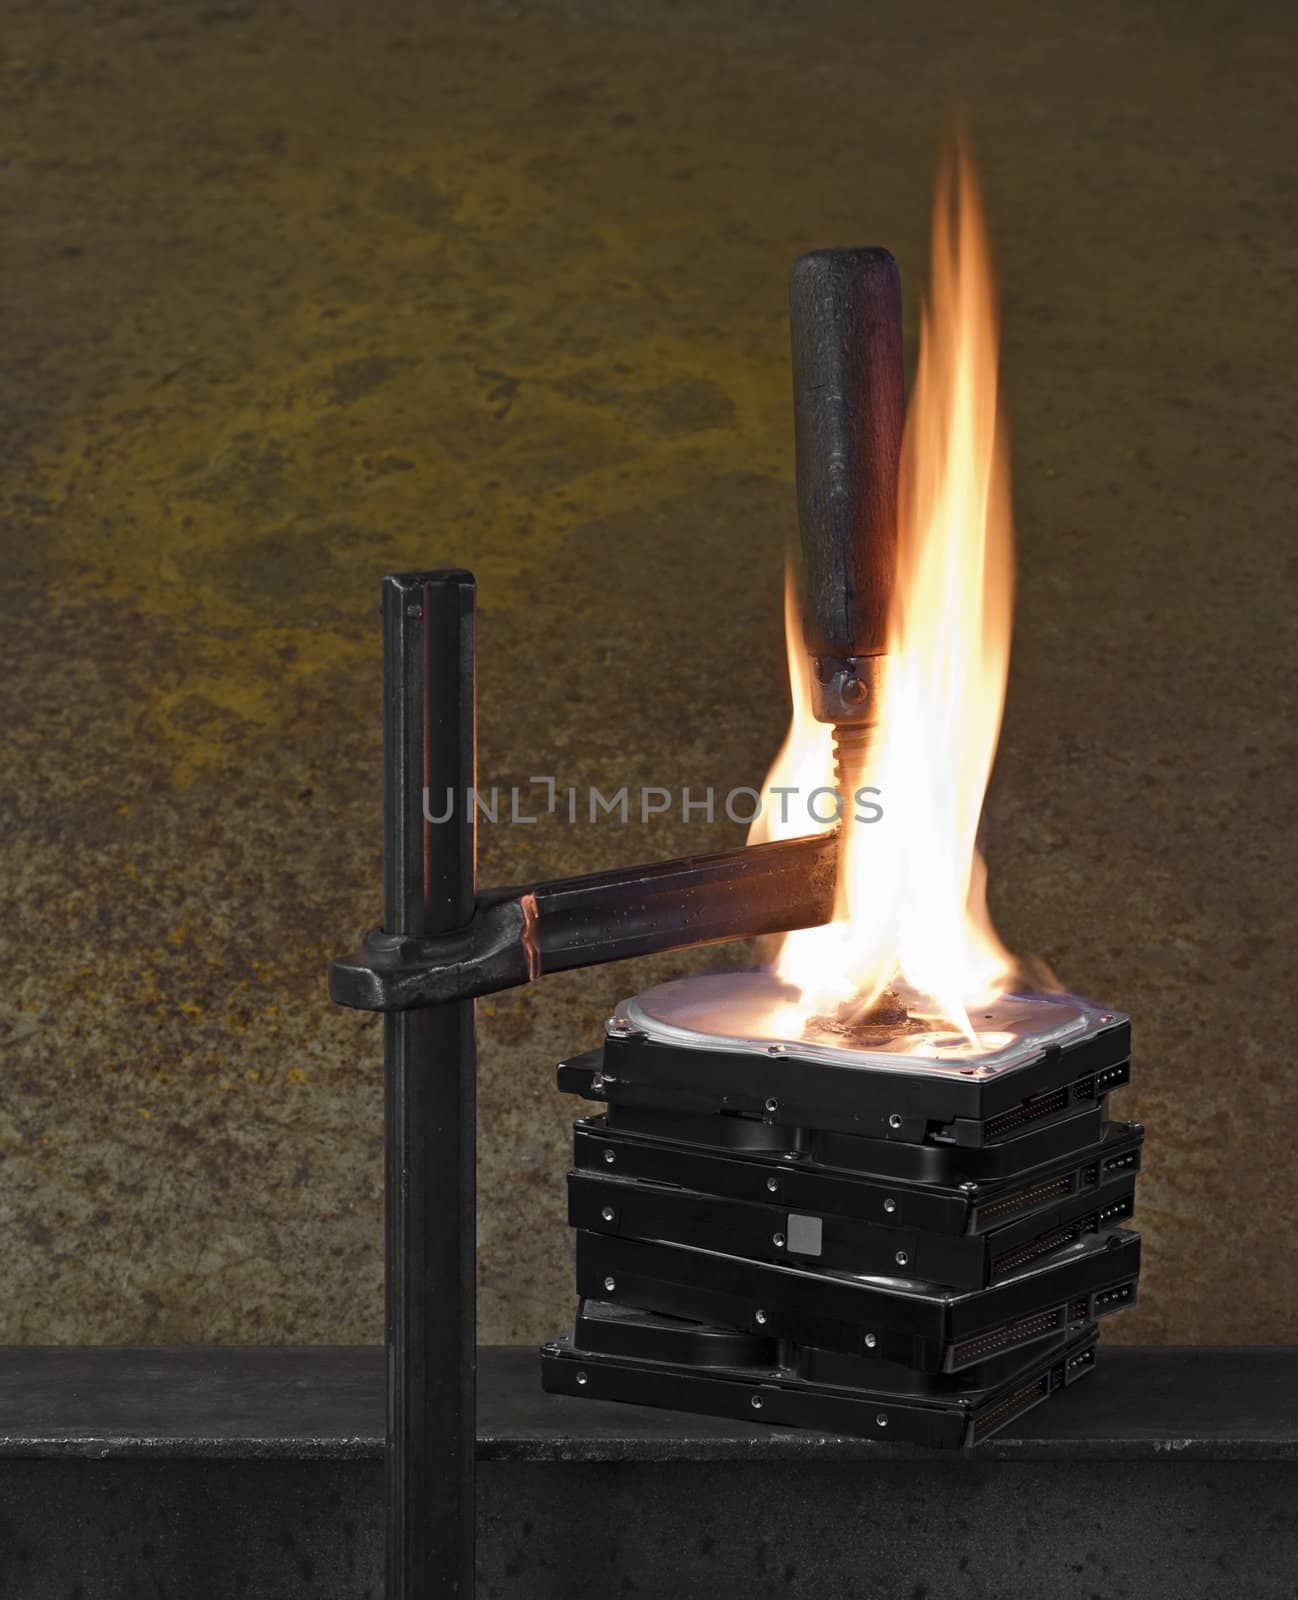 flames on stack of pressed hard drives. pressed by clamp